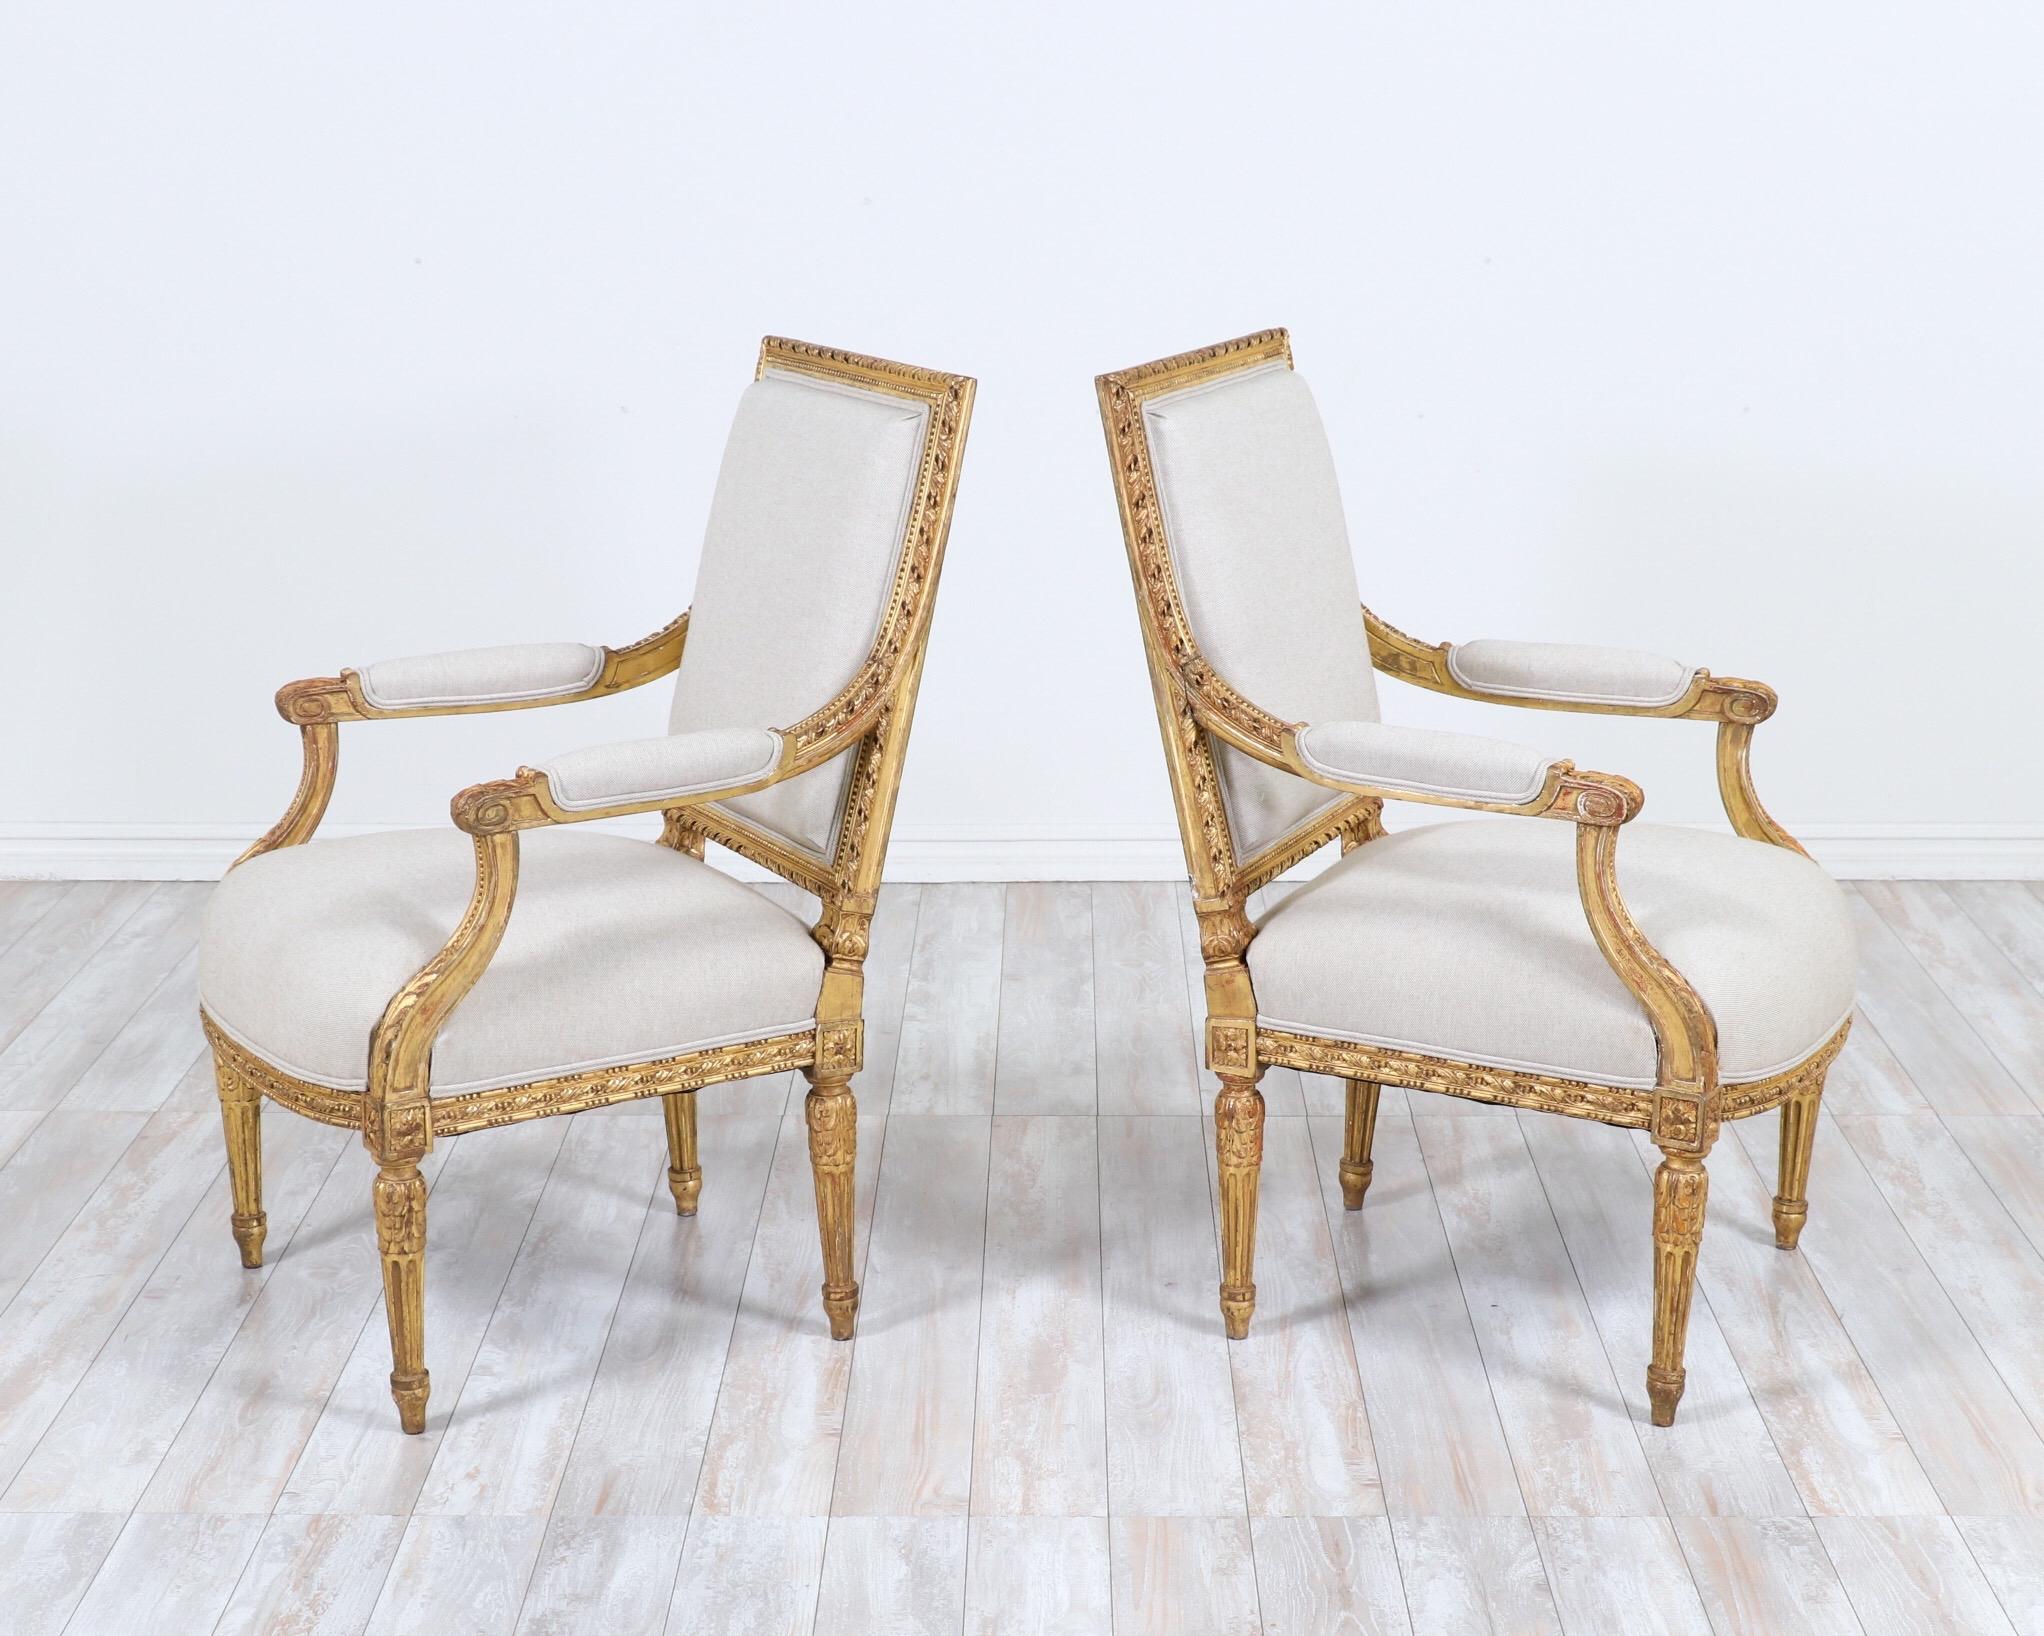 Early 20th Century French Antique Louis XVI Giltwood Armchairs